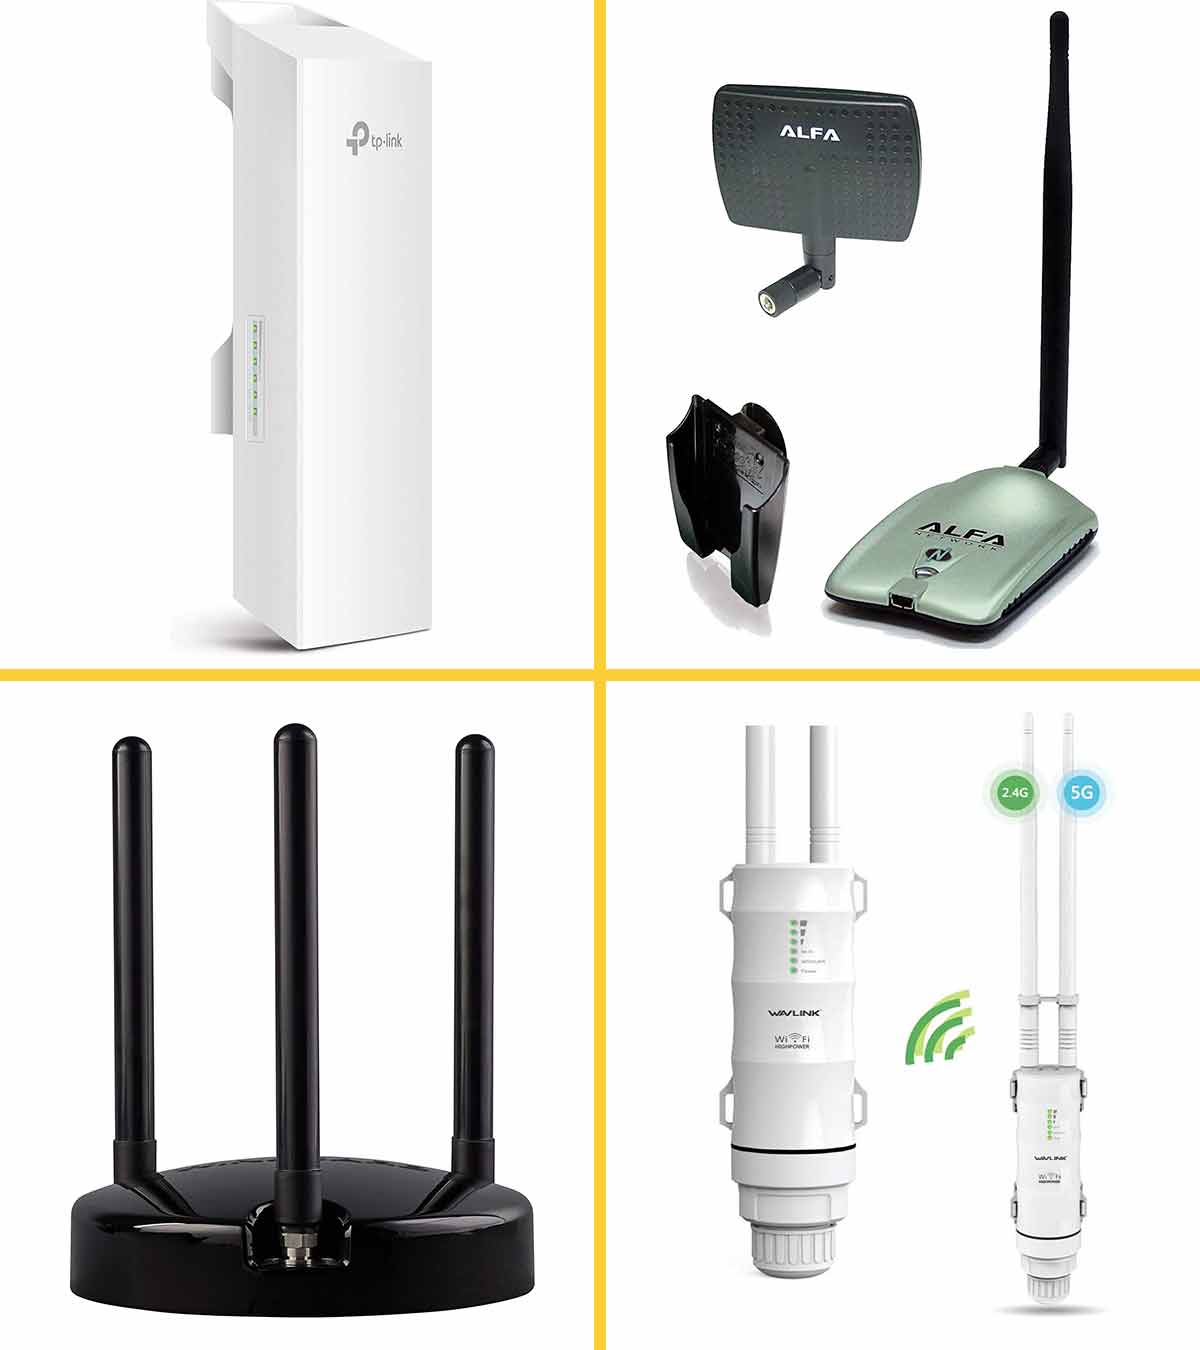 Long Range Extender WiFi Repeater Signal Booster Built-in High Gain Antenna